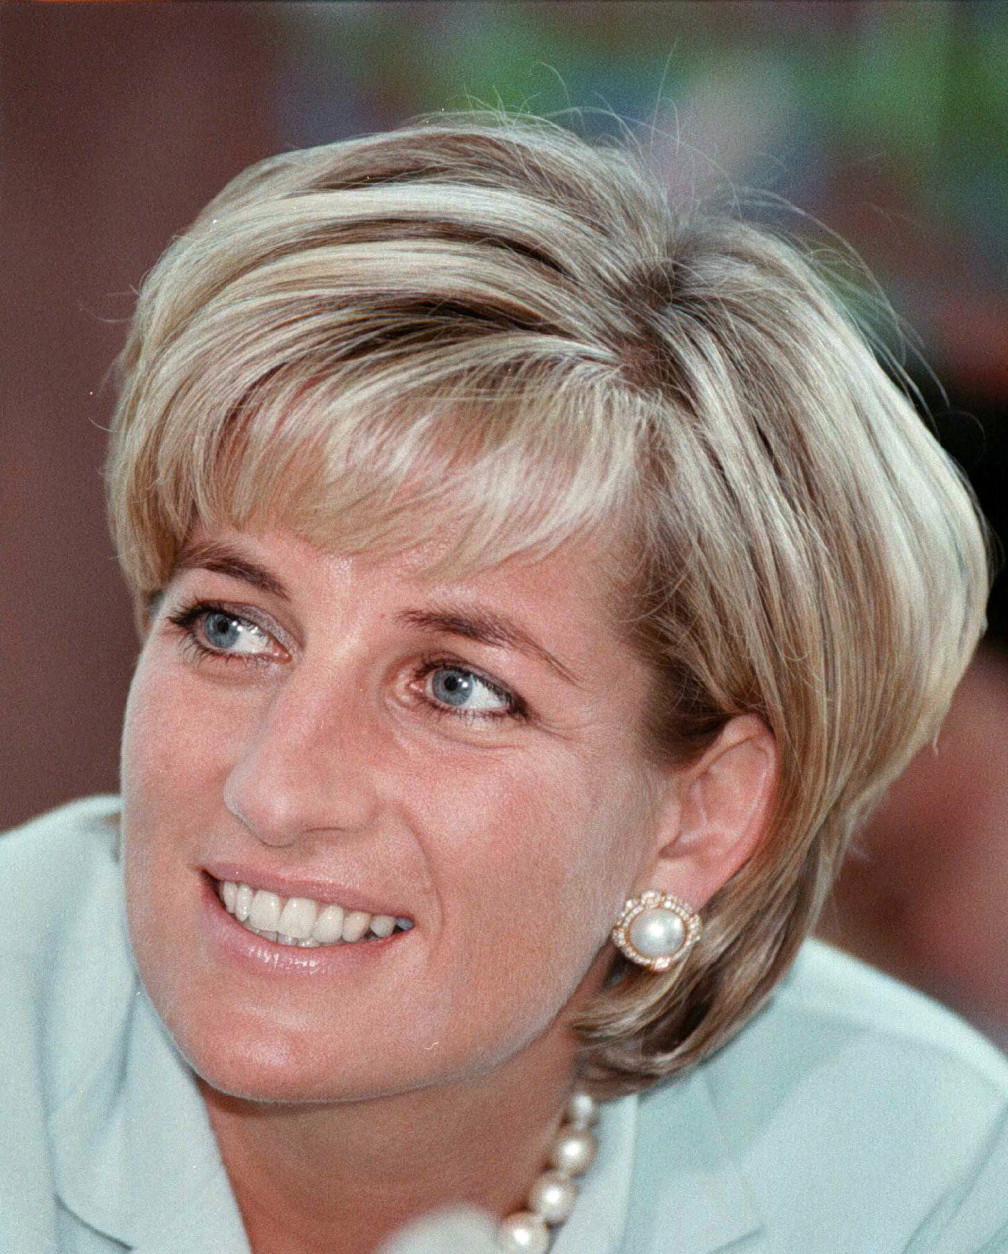 Diana, the Princess of Wales during her visit to Leicester in this May 27, 1997 photo, to formally open The Richard Attenborough Centre for Disability and Arts. (AP Photo/POOL)